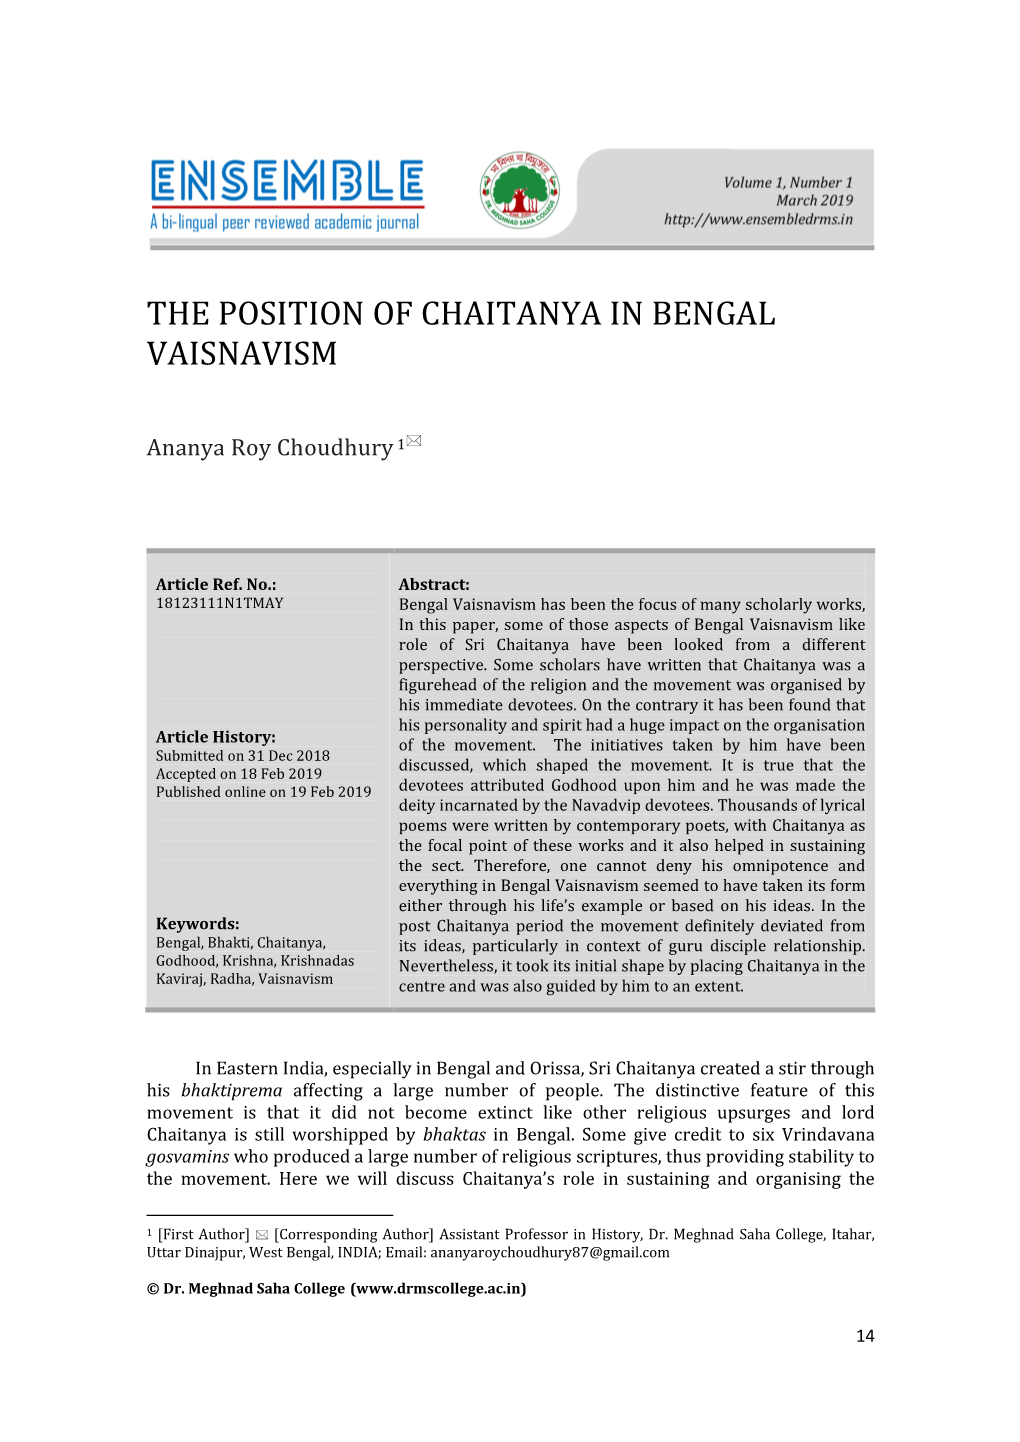 The Position of Chaitanya in Bengal Vaisnavism